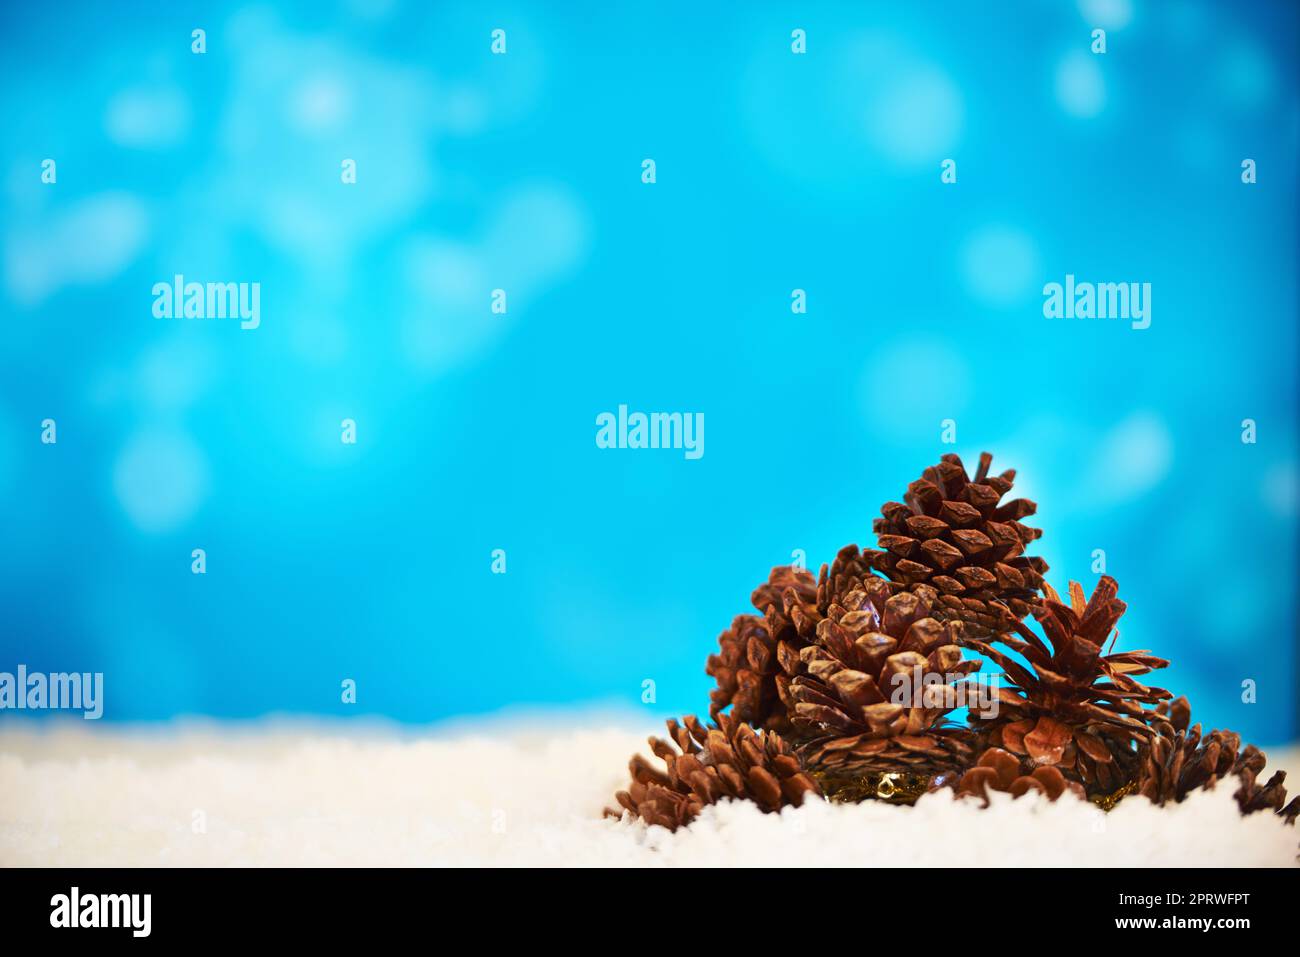 Time for festivities. christmas decorations against a festive blue background. Stock Photo